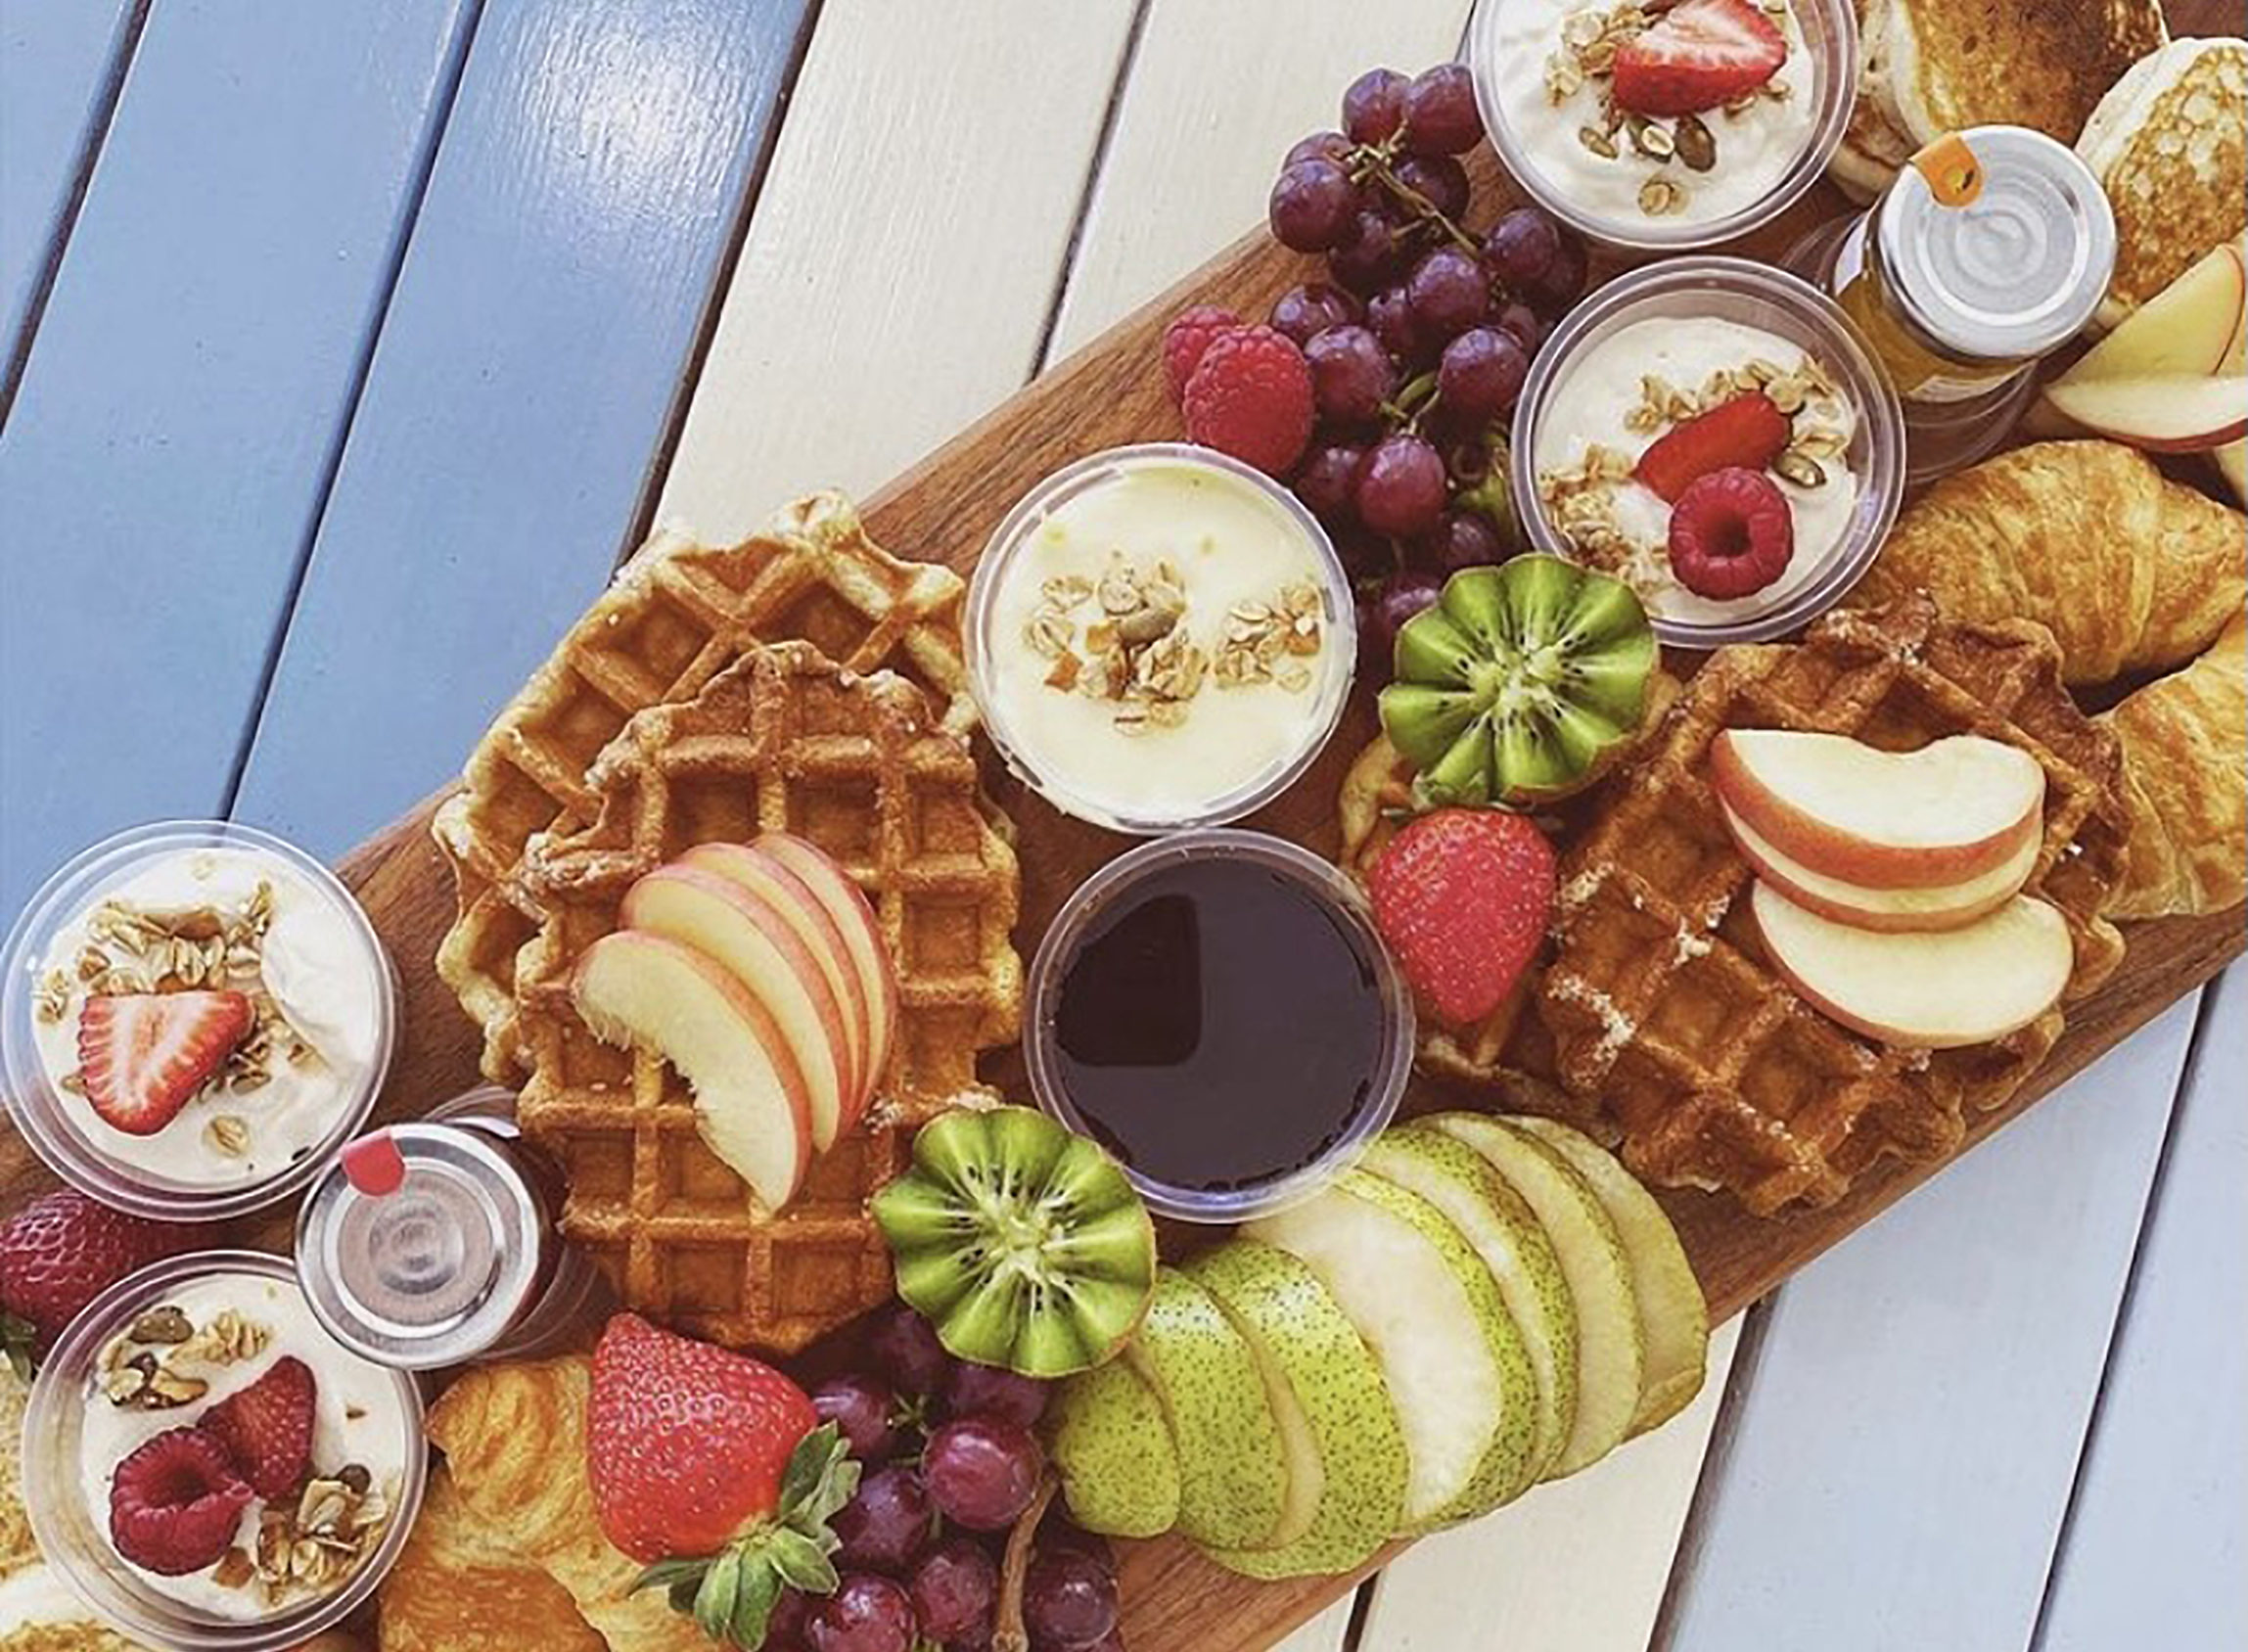 a colourful platter of breakfast food including waffles fruit and yoghurt on a blue and white striped table